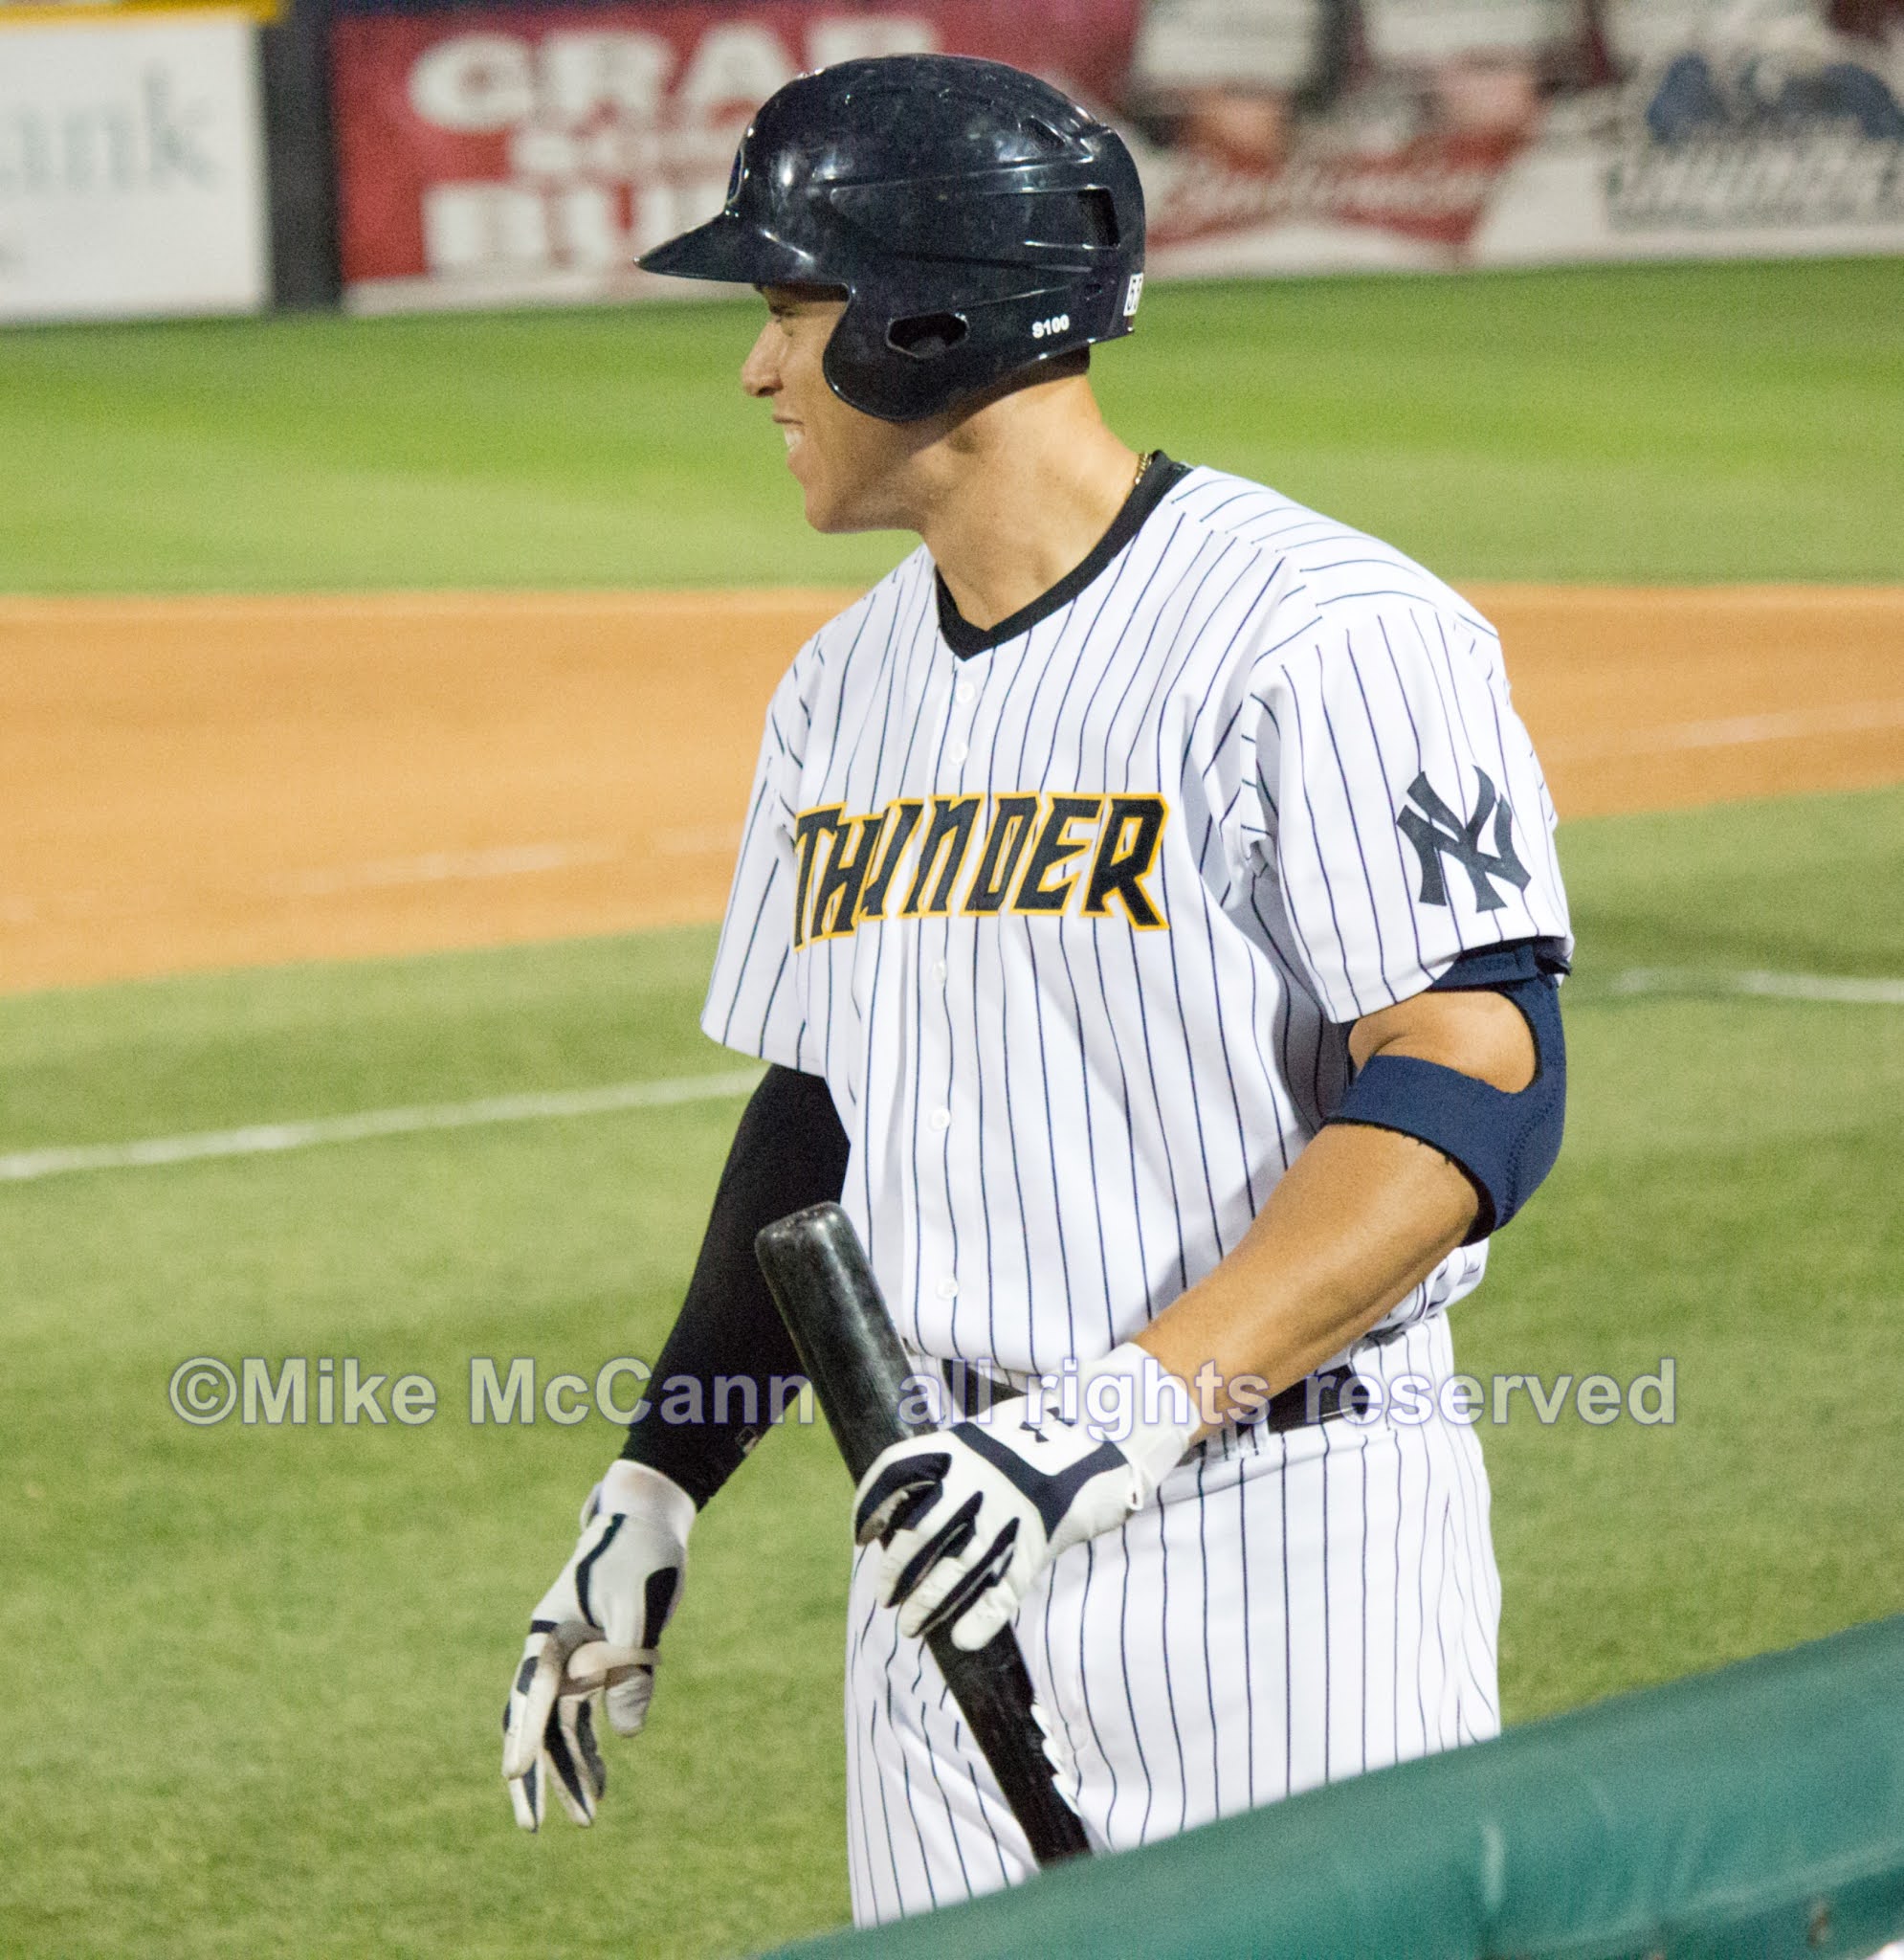 Throwback Thursday: A Minor League Night in 2015